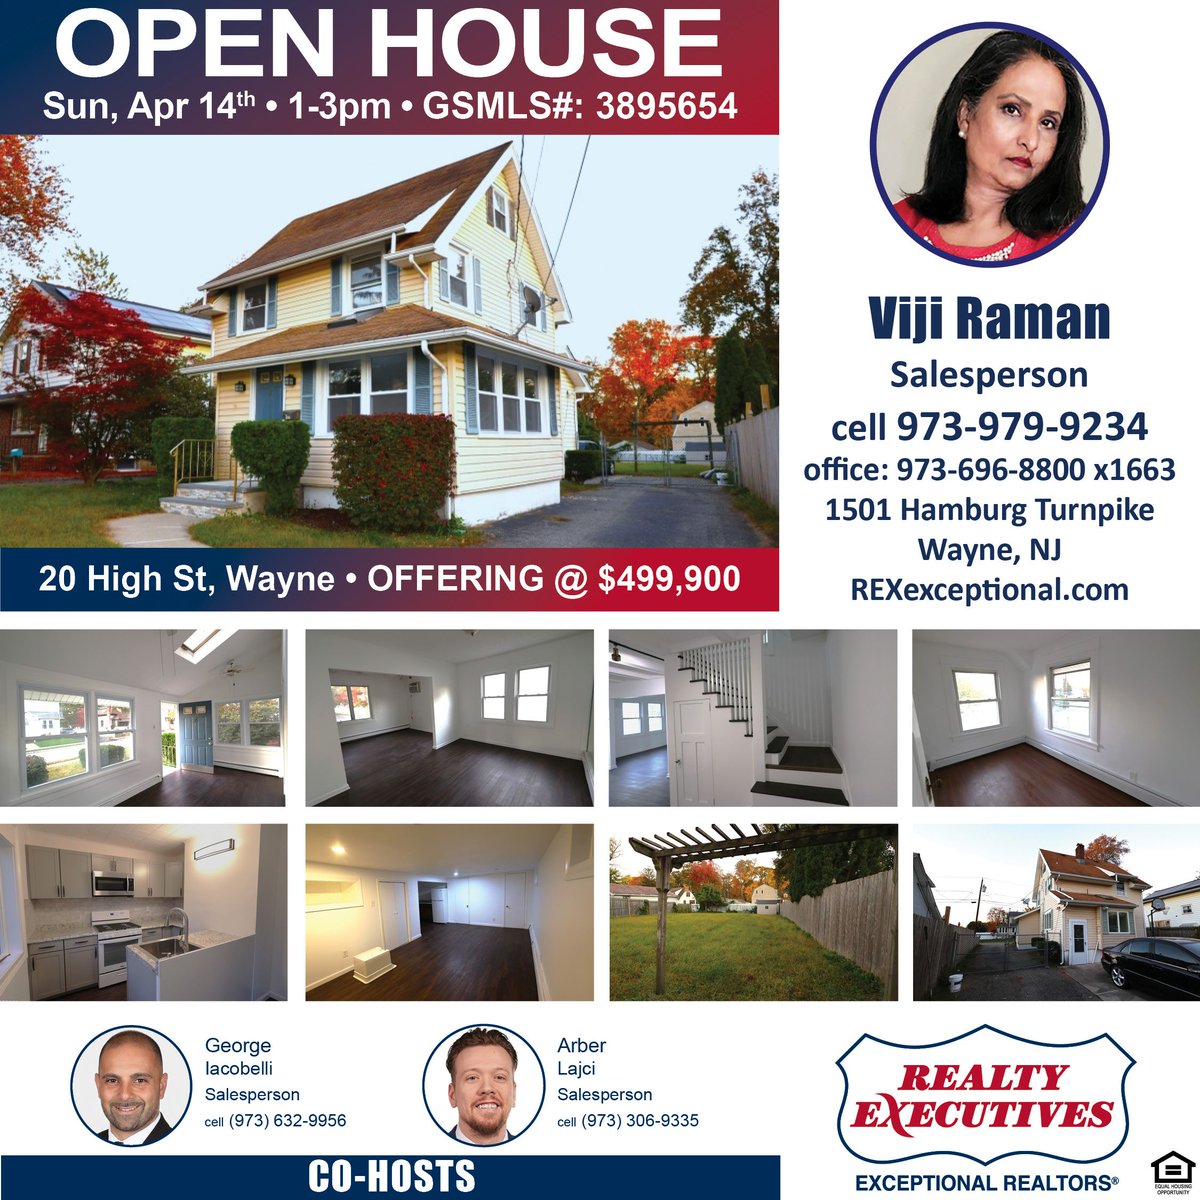 😍OPEN HOUSE 🖊Sunday, April 14th ⌚️1pm - 3pm 🚗20 High St, Wayne, NJ 💲499,900 🏠Complete kitchen remodel, new flooring, stairs, and windows are just some of the dazzling upgrades! #openhouse #waynenj #enclosedporch #summerkitchen #skylight #finishedbasement